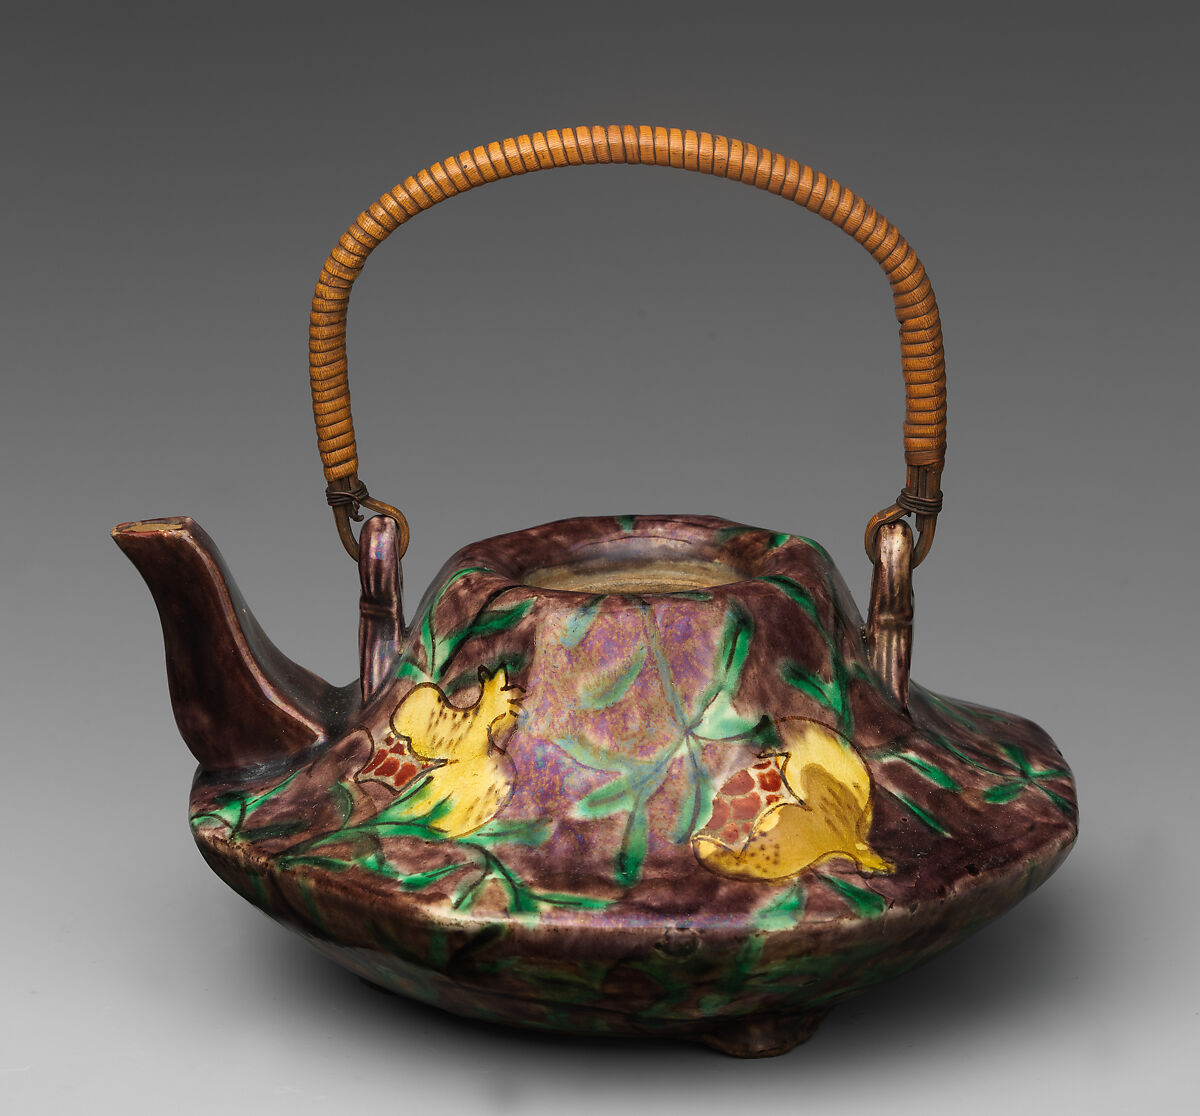 Teapot, Pottery decorated with polychrome enamels; straw handle (Meppotani ware), Japan 